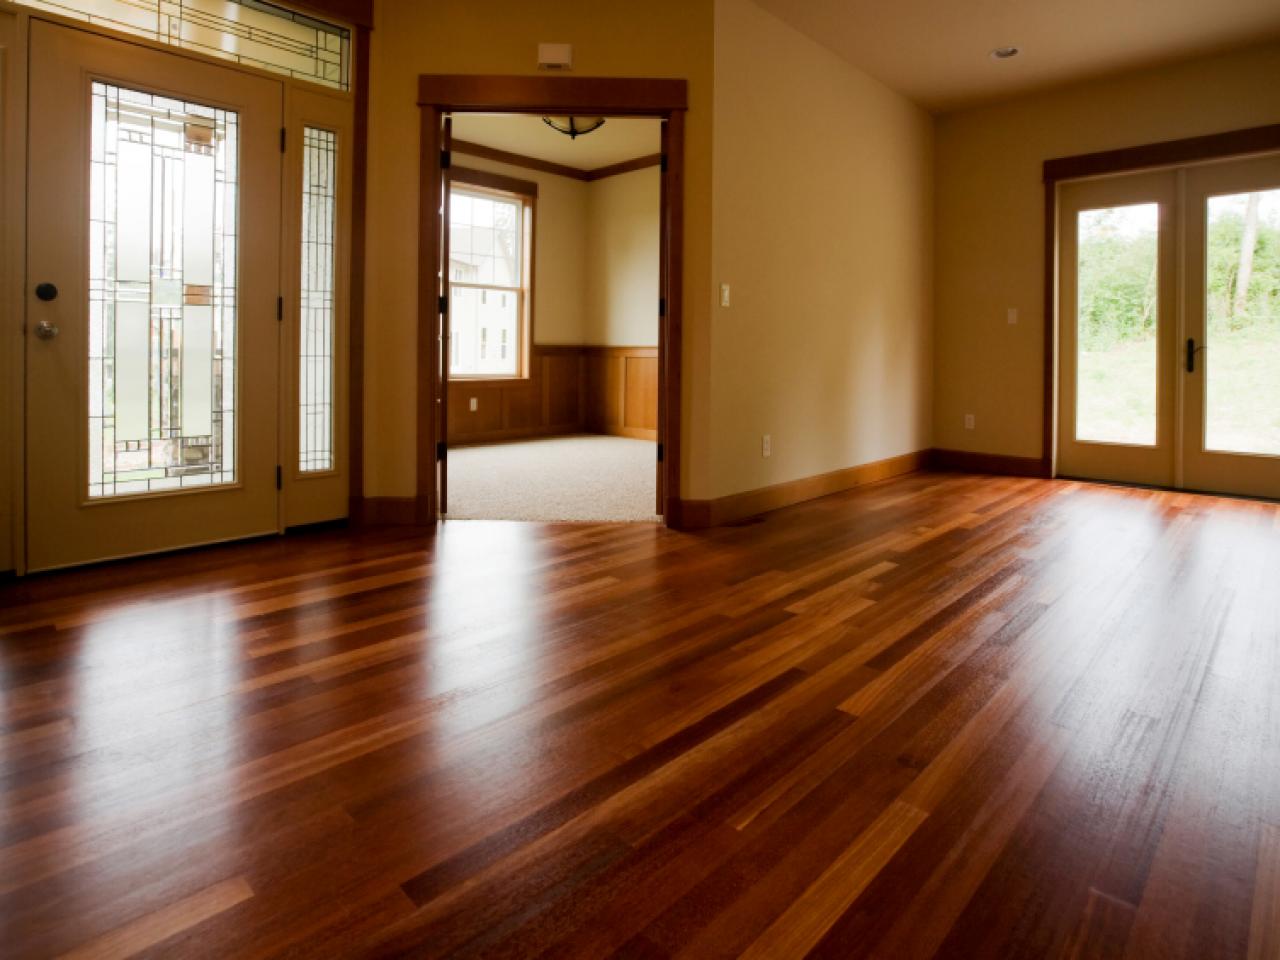 Cleaning Tile Wood And Vinyl Floors, How To Get Hardwood Floors Shiny